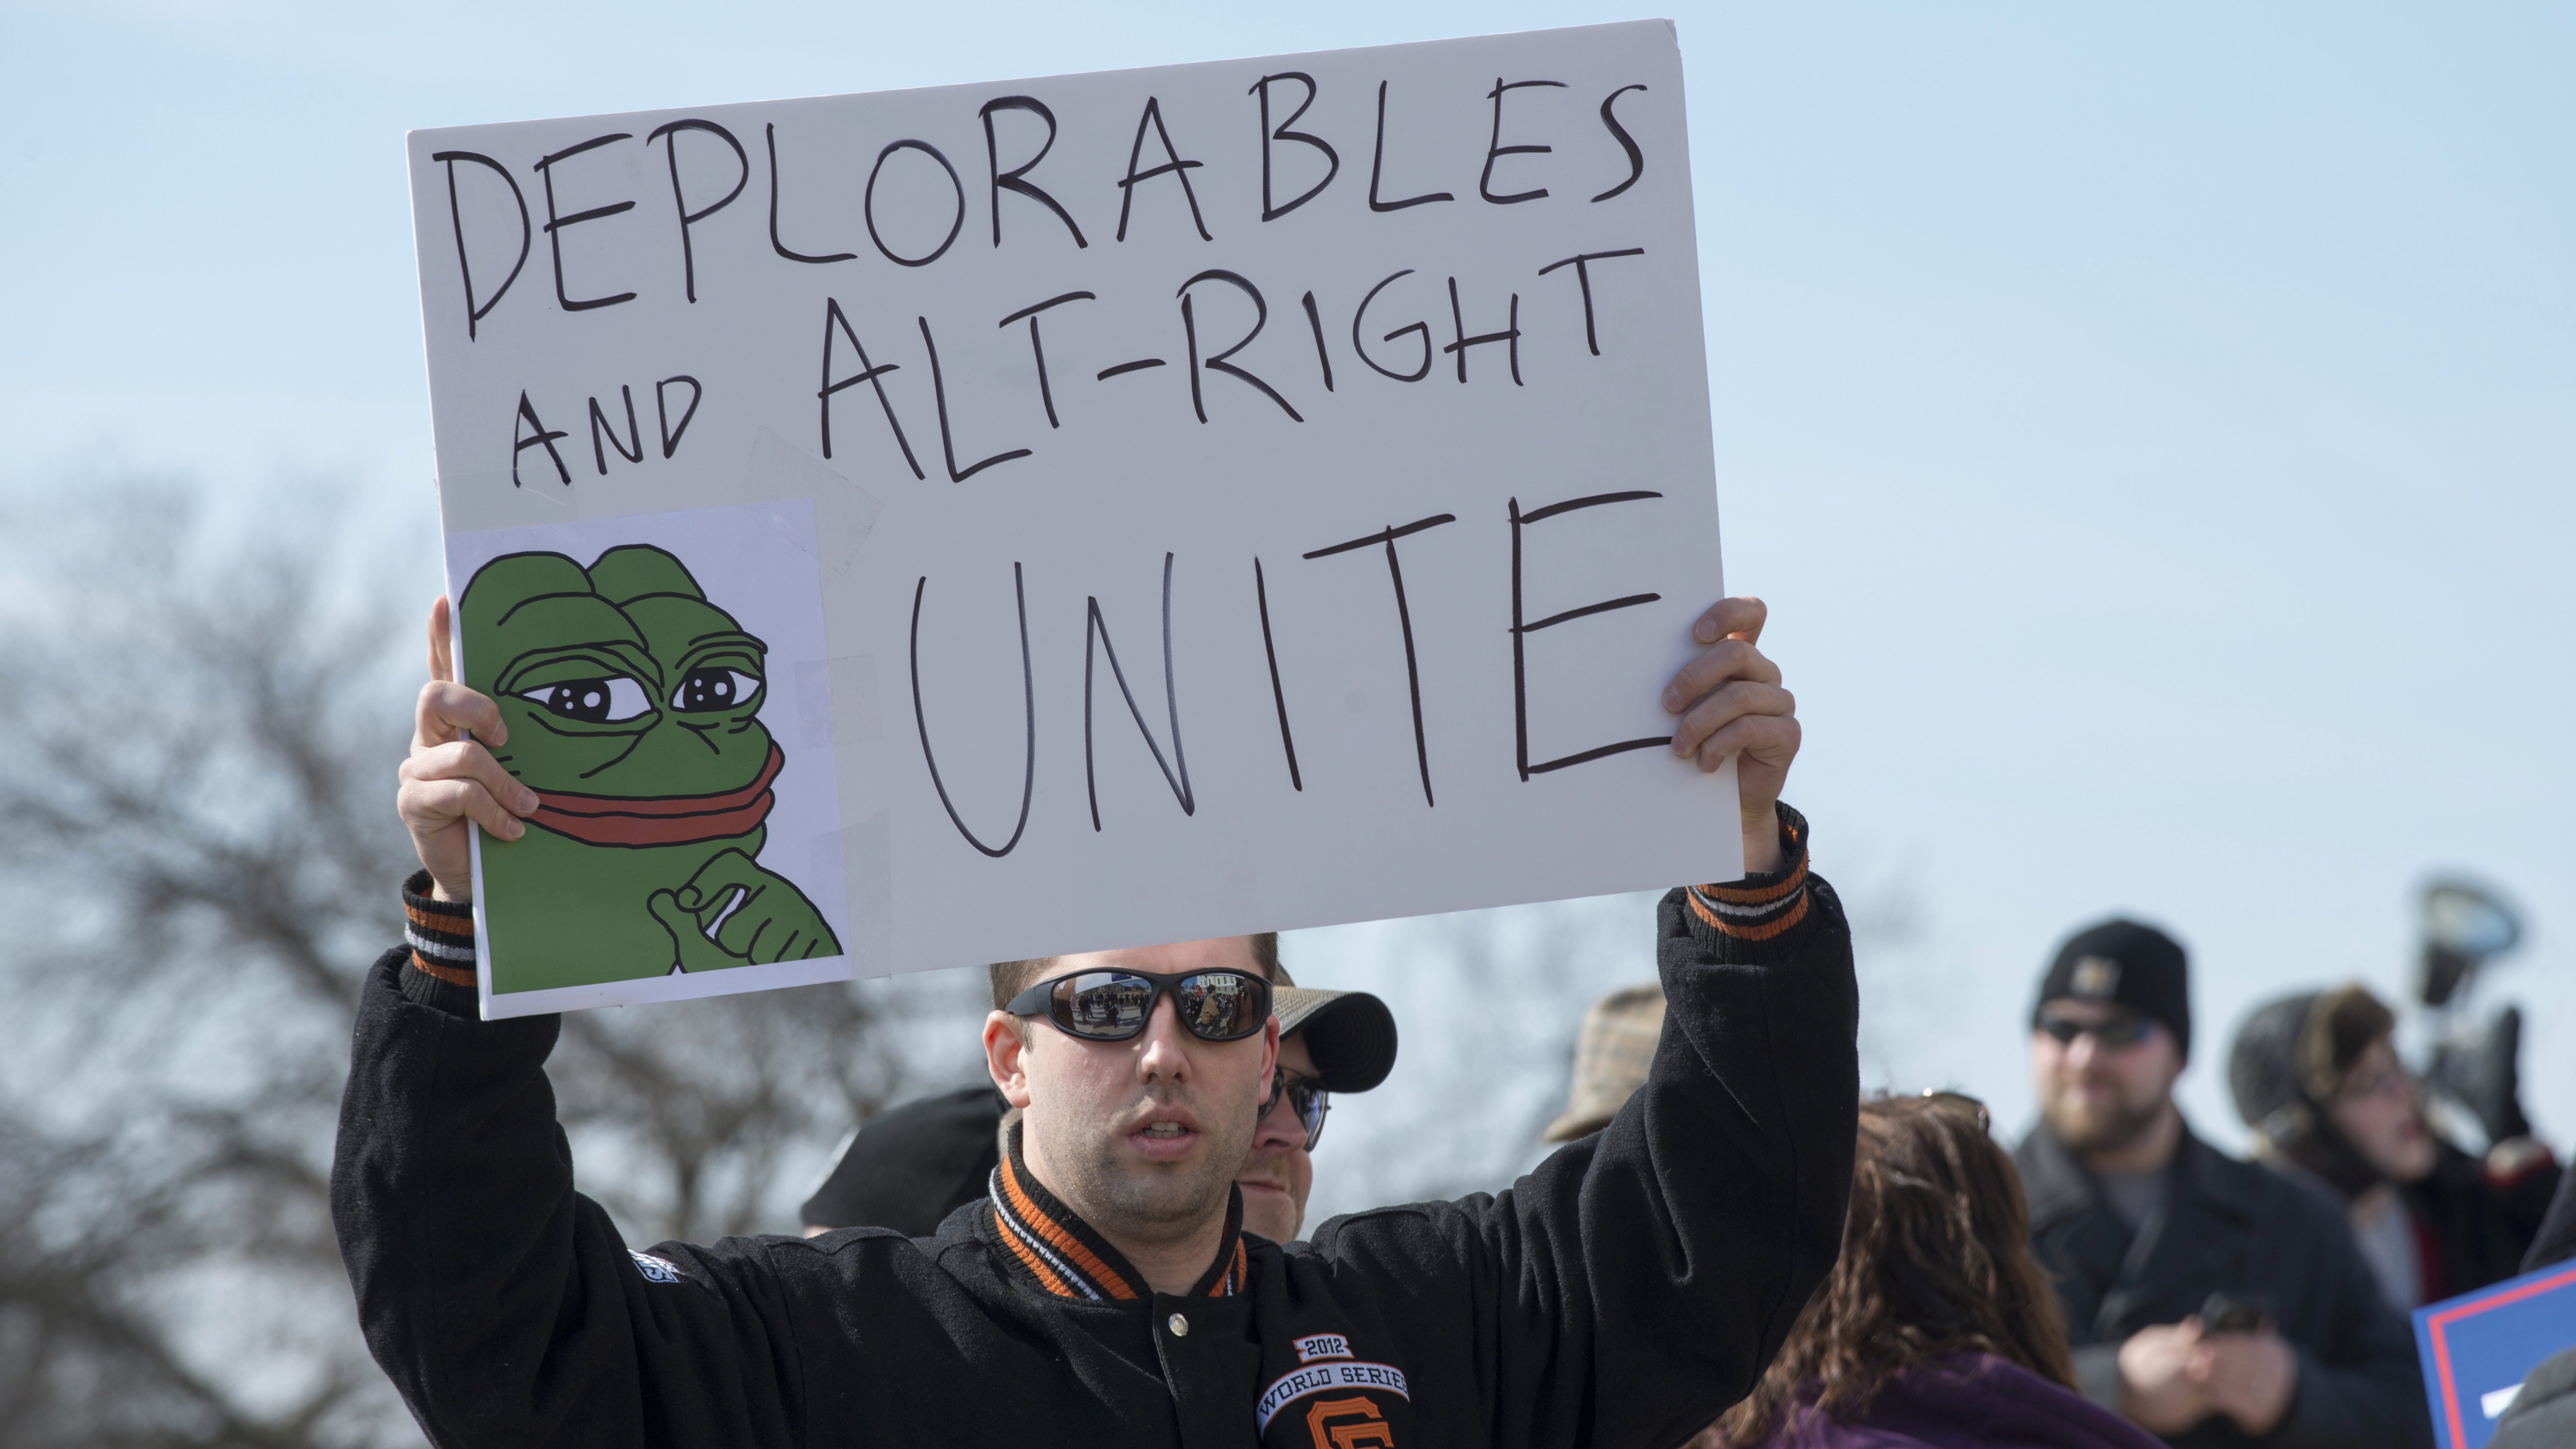 Supporters and critics of President Donald Trump gathered to protest outside of the Minnesota capitol building on March 4, 2017.